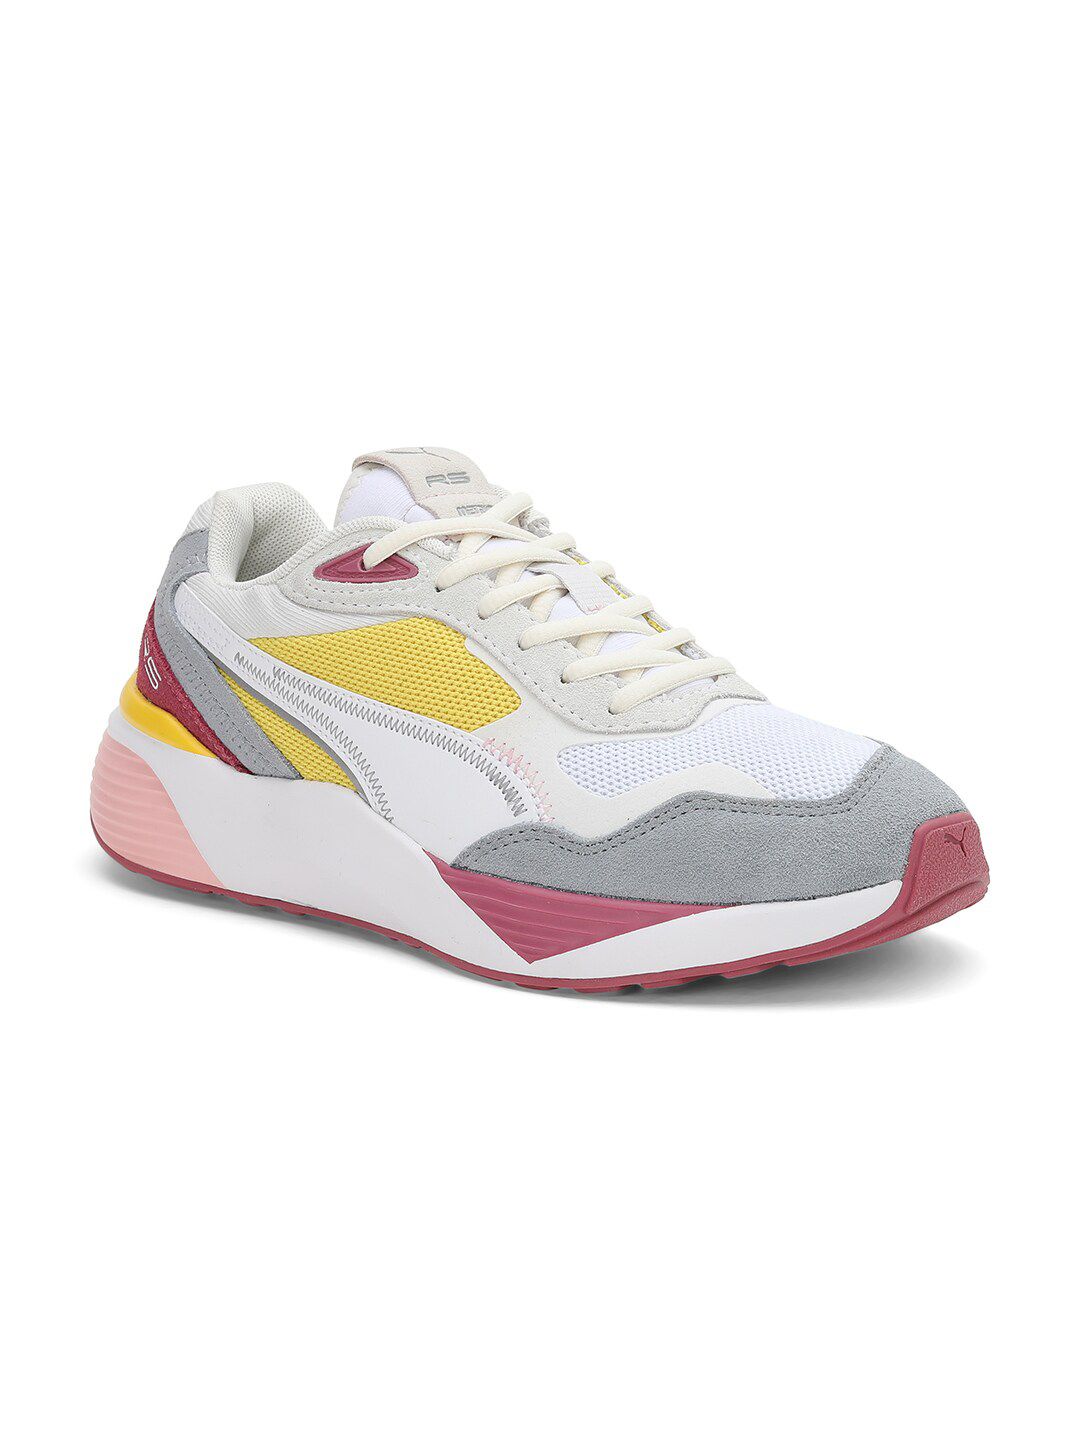 Puma Men White & Yellow Colourblocked Casual RS-Metric Sneakers Price in India